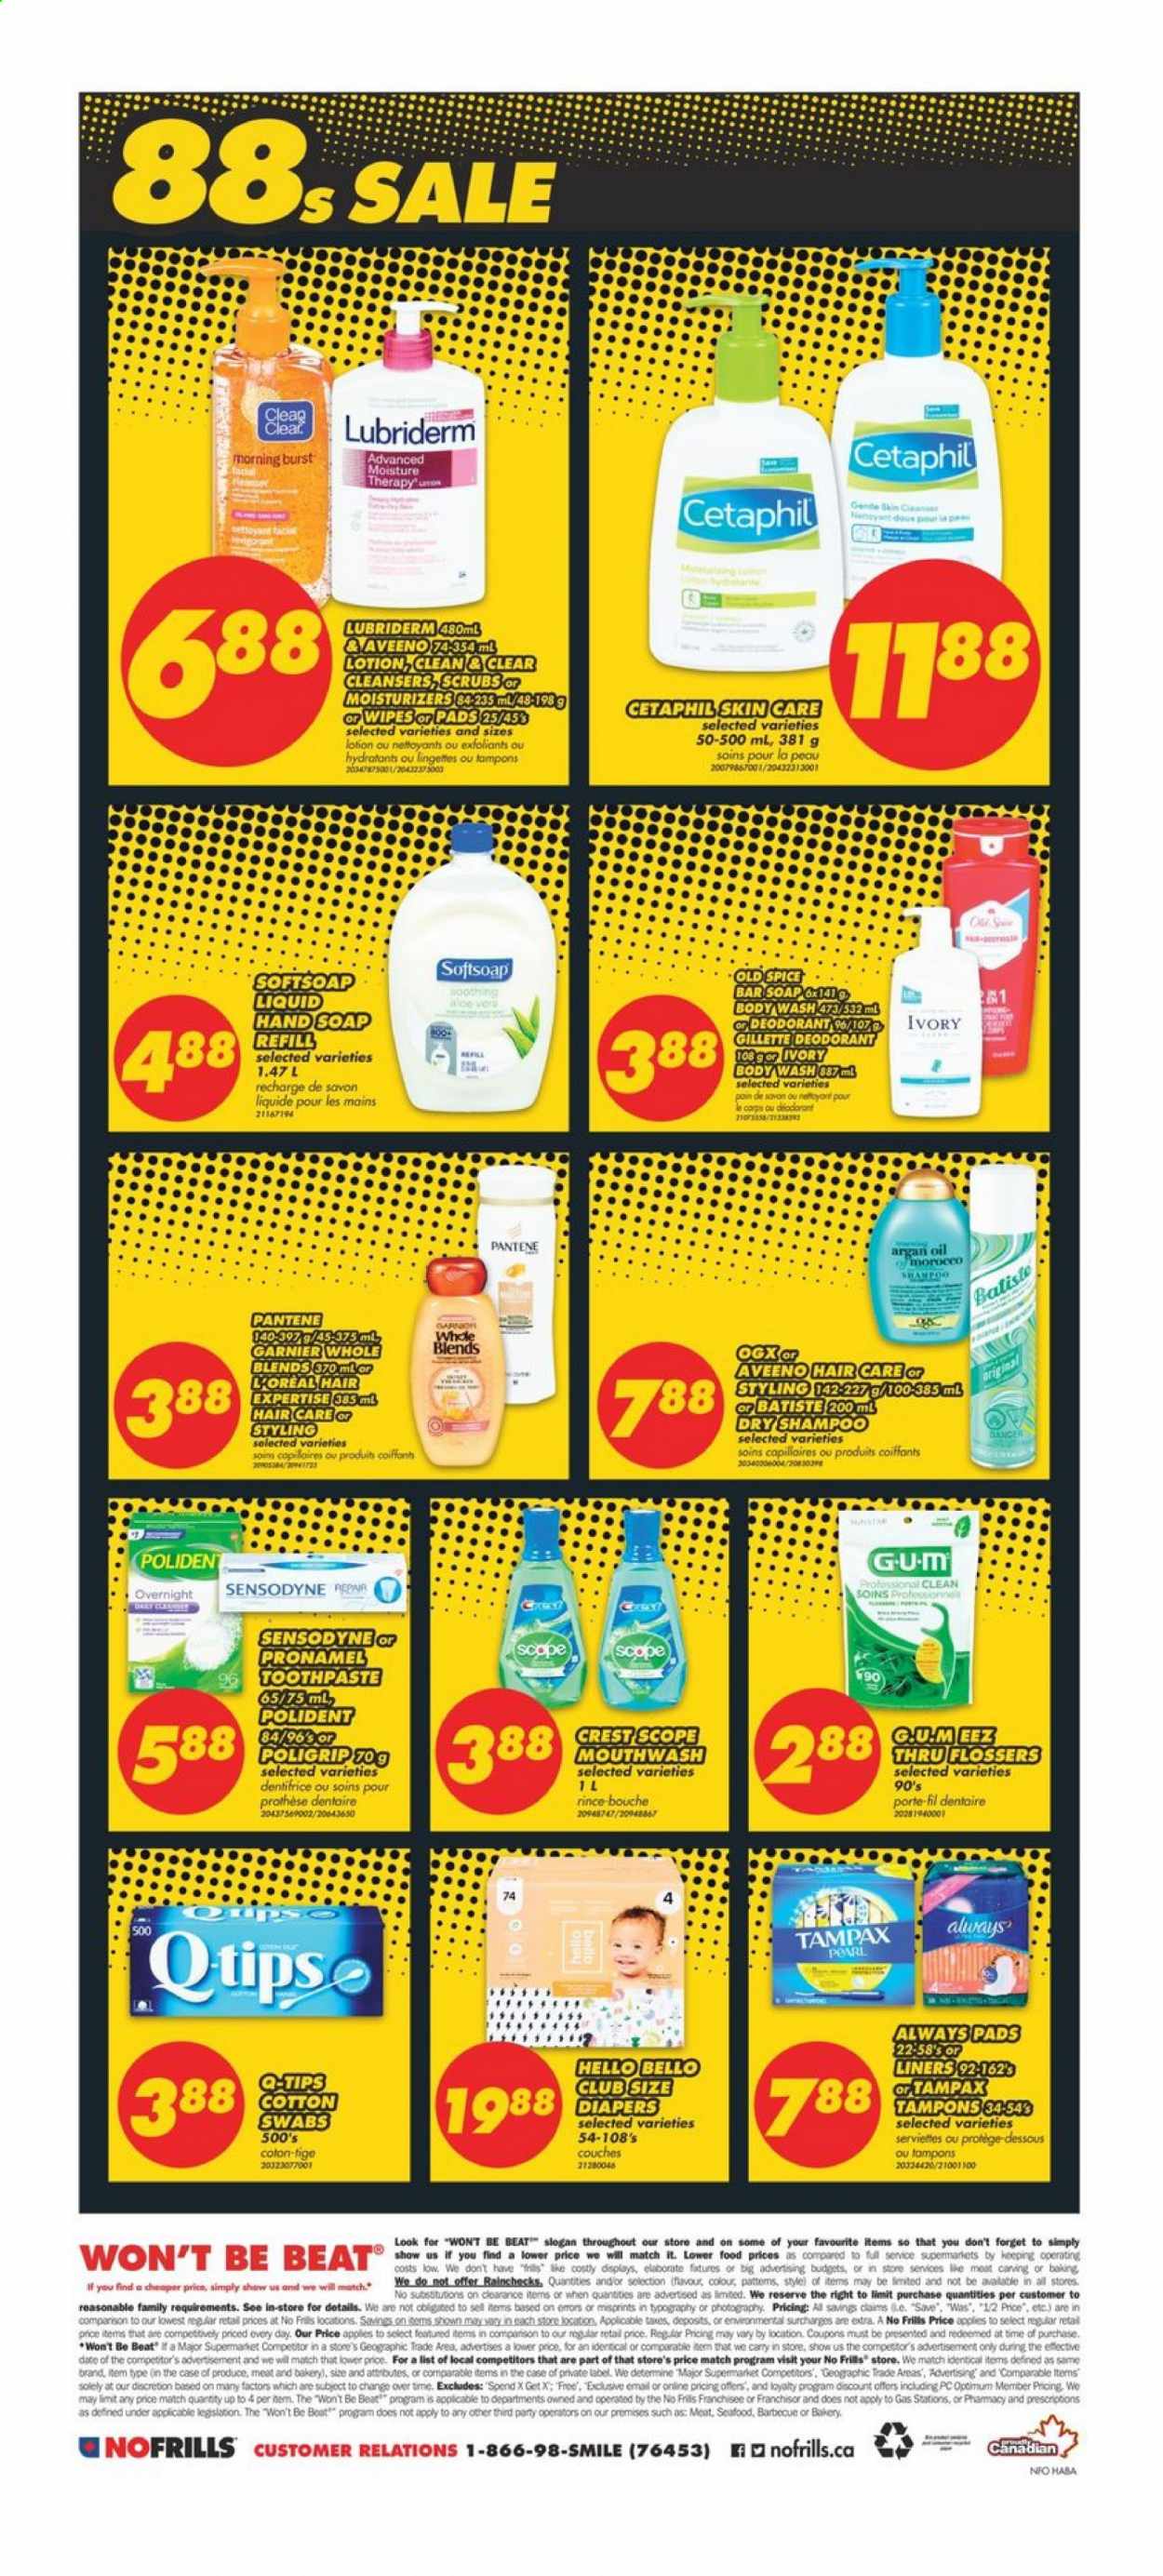 thumbnail - No Frills Flyer - January 07, 2021 - January 13, 2021 - Sales products - seafood, spice, wipes, nappies, Aveeno, body wash, Softsoap, hand soap, soap bar, soap, toothpaste, mouthwash, Polident, Crest, Always pads, tampons, L’Oréal, Moisture Therapy, moisturizer, Clean & Clear, OGX, body lotion, Lubriderm, anti-perspirant, Optimum, argan oil, Garnier, Gillette, shampoo, Tampax, Pantene, Old Spice, Sensodyne, deodorant. Page 8.